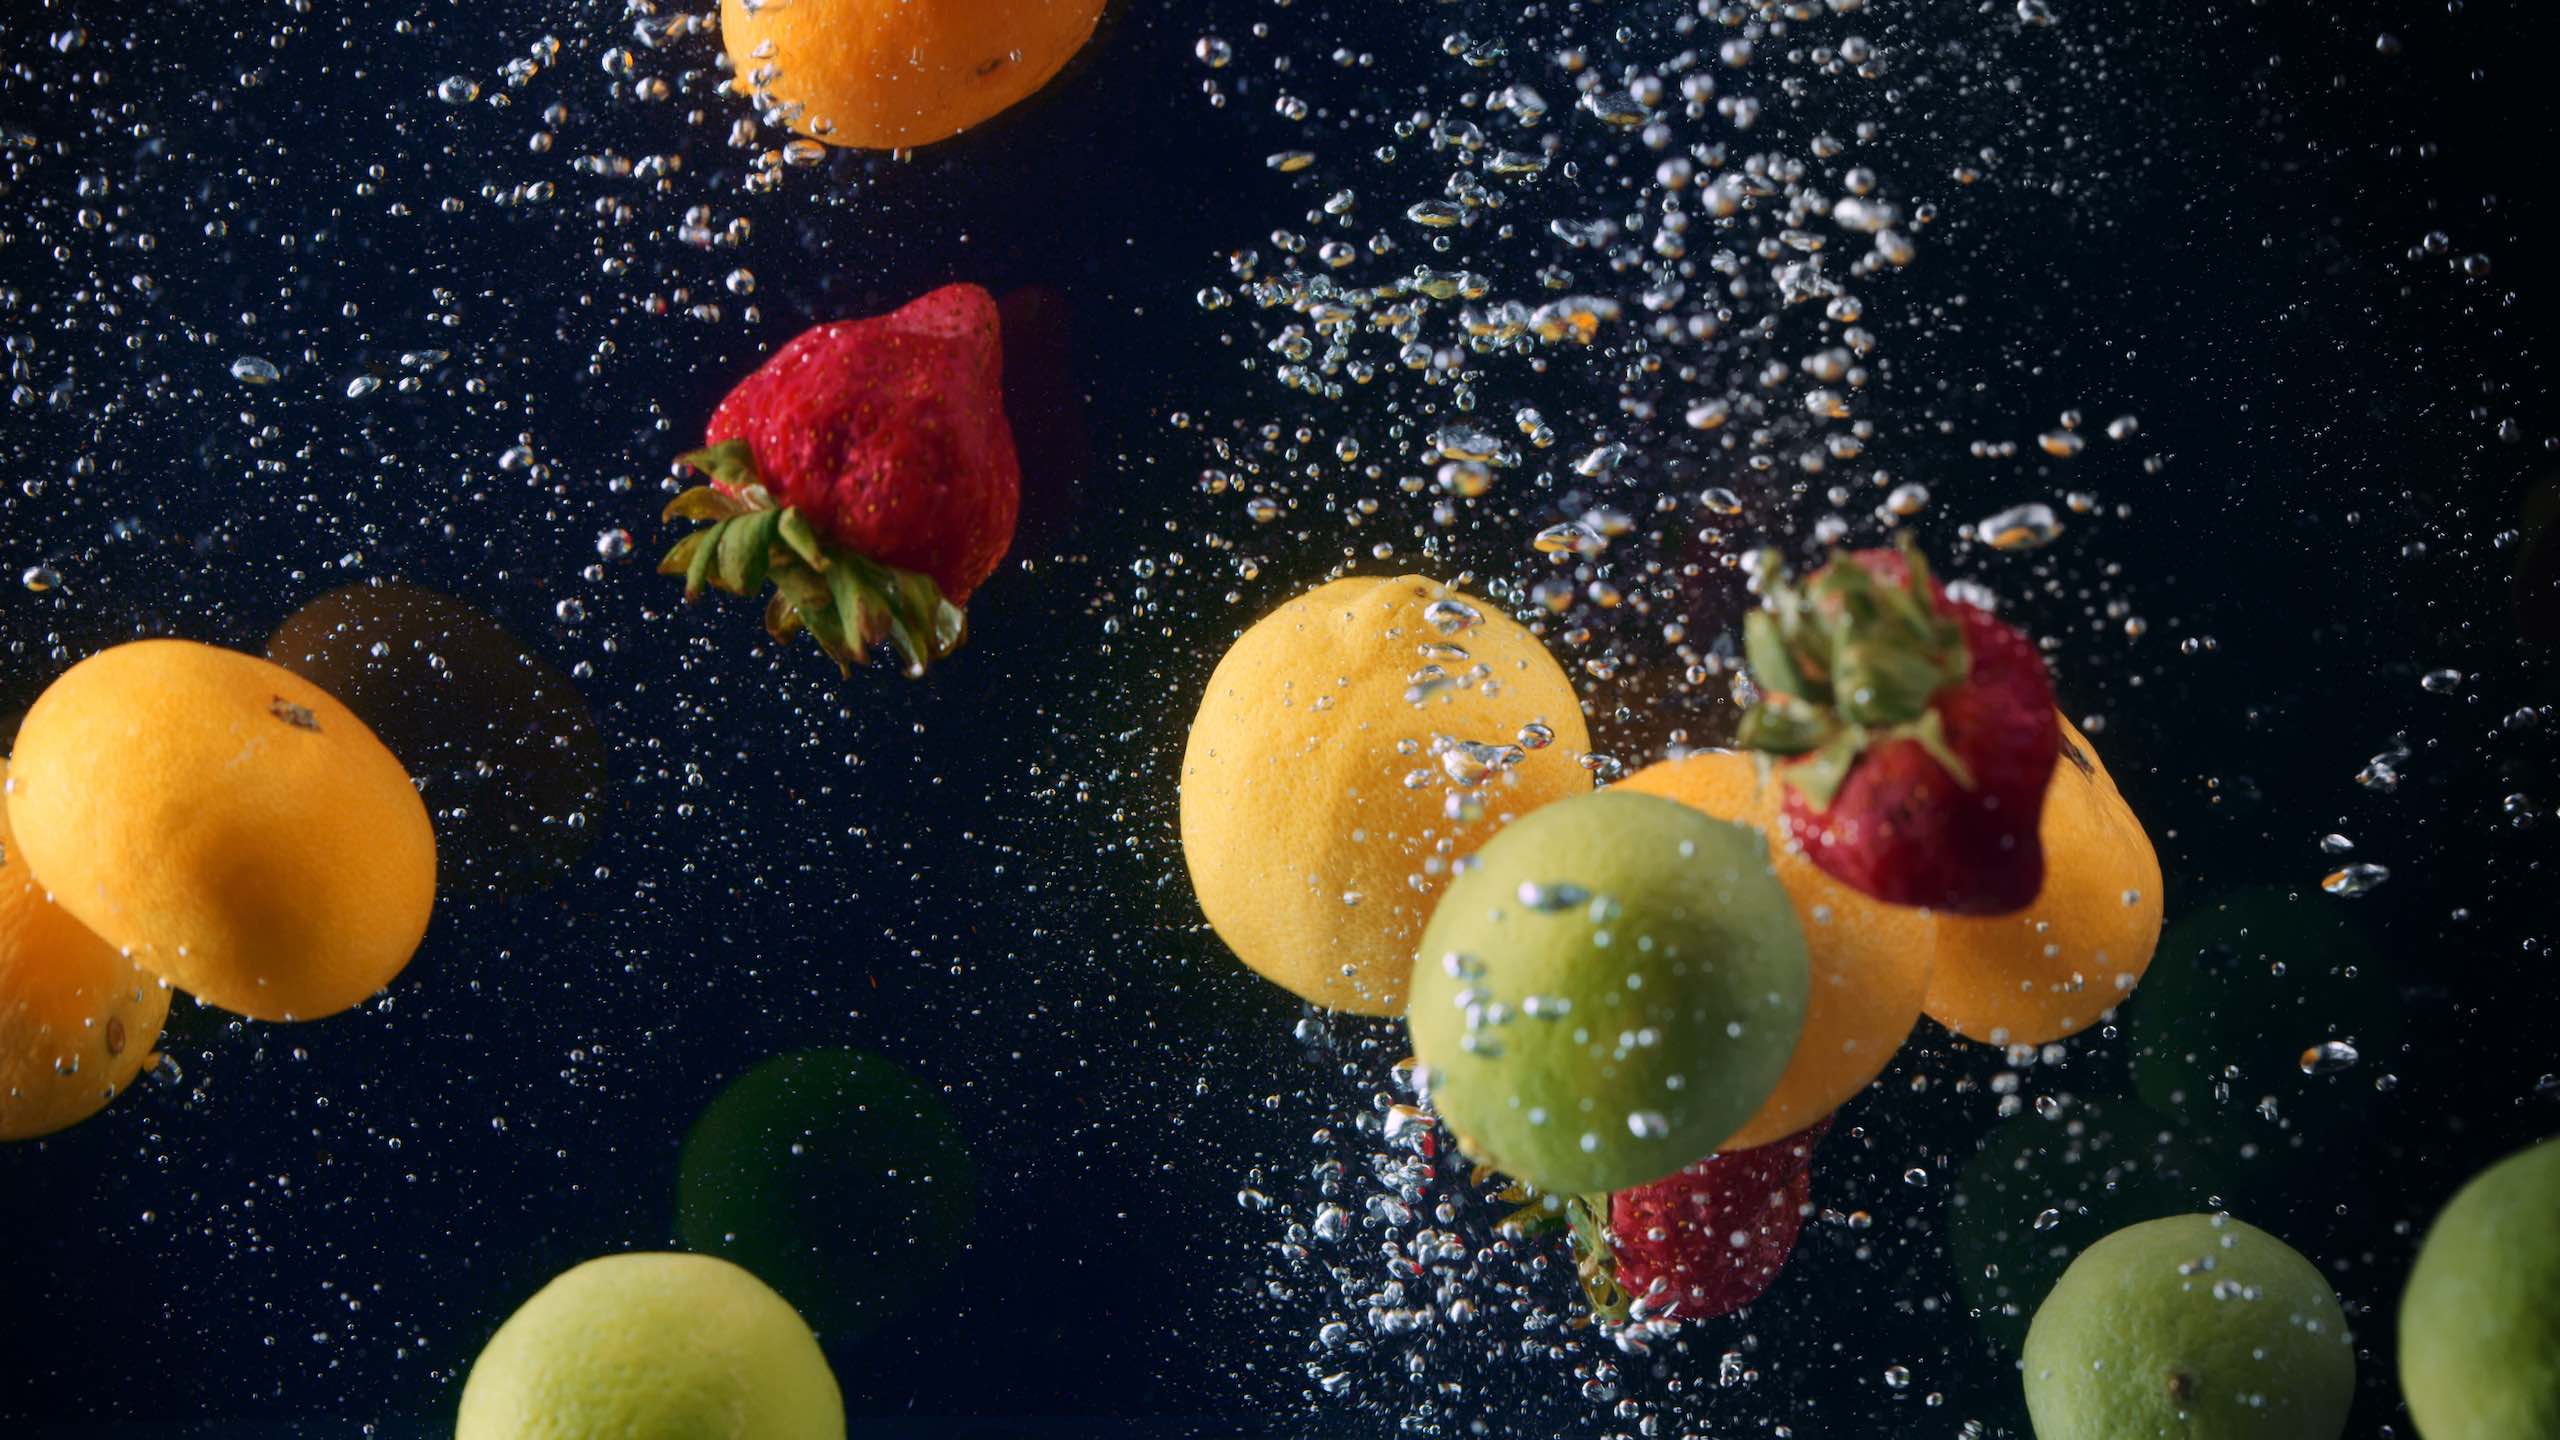 Just water video ad Tangerines, strawberries and limes under water with bubbles.